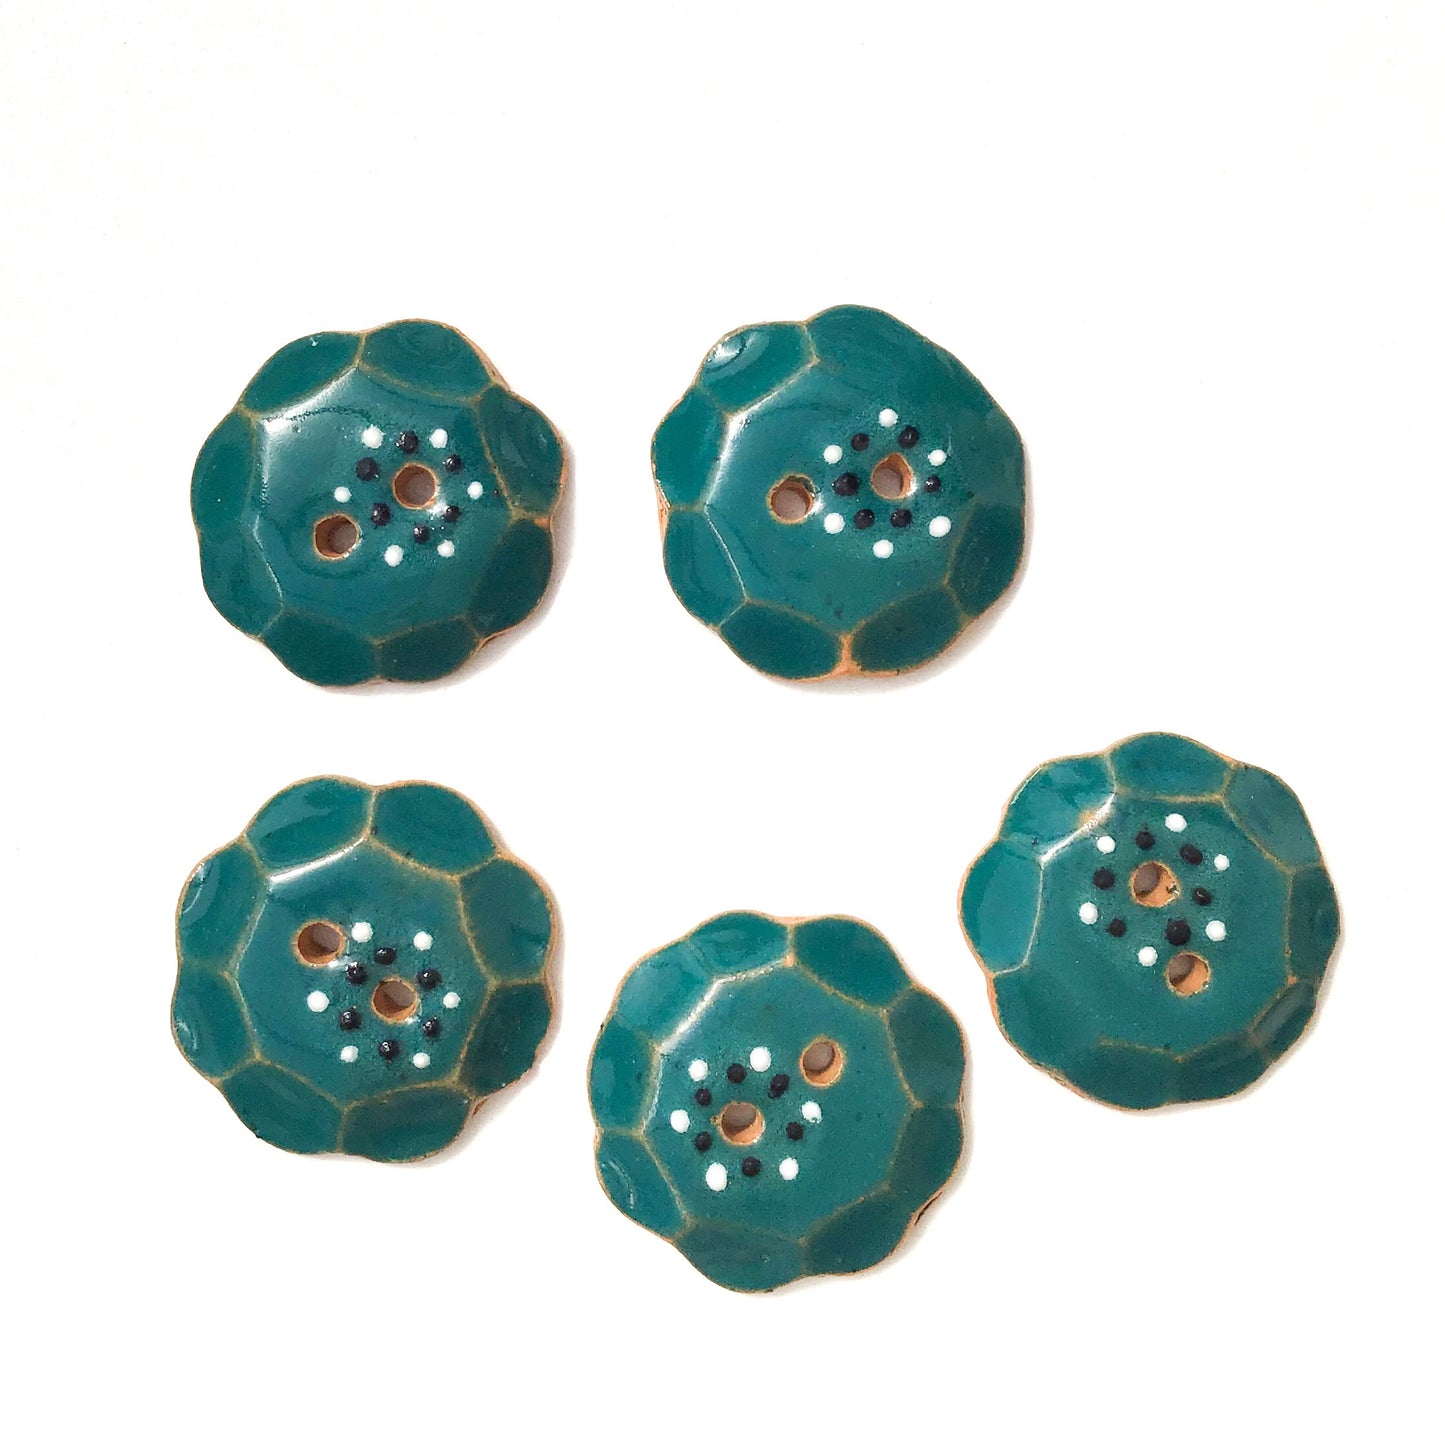 Teal "Spark" Ceramic Buttons with Scallops - Teal Clay Buttons - 7/8" - 5 Pack